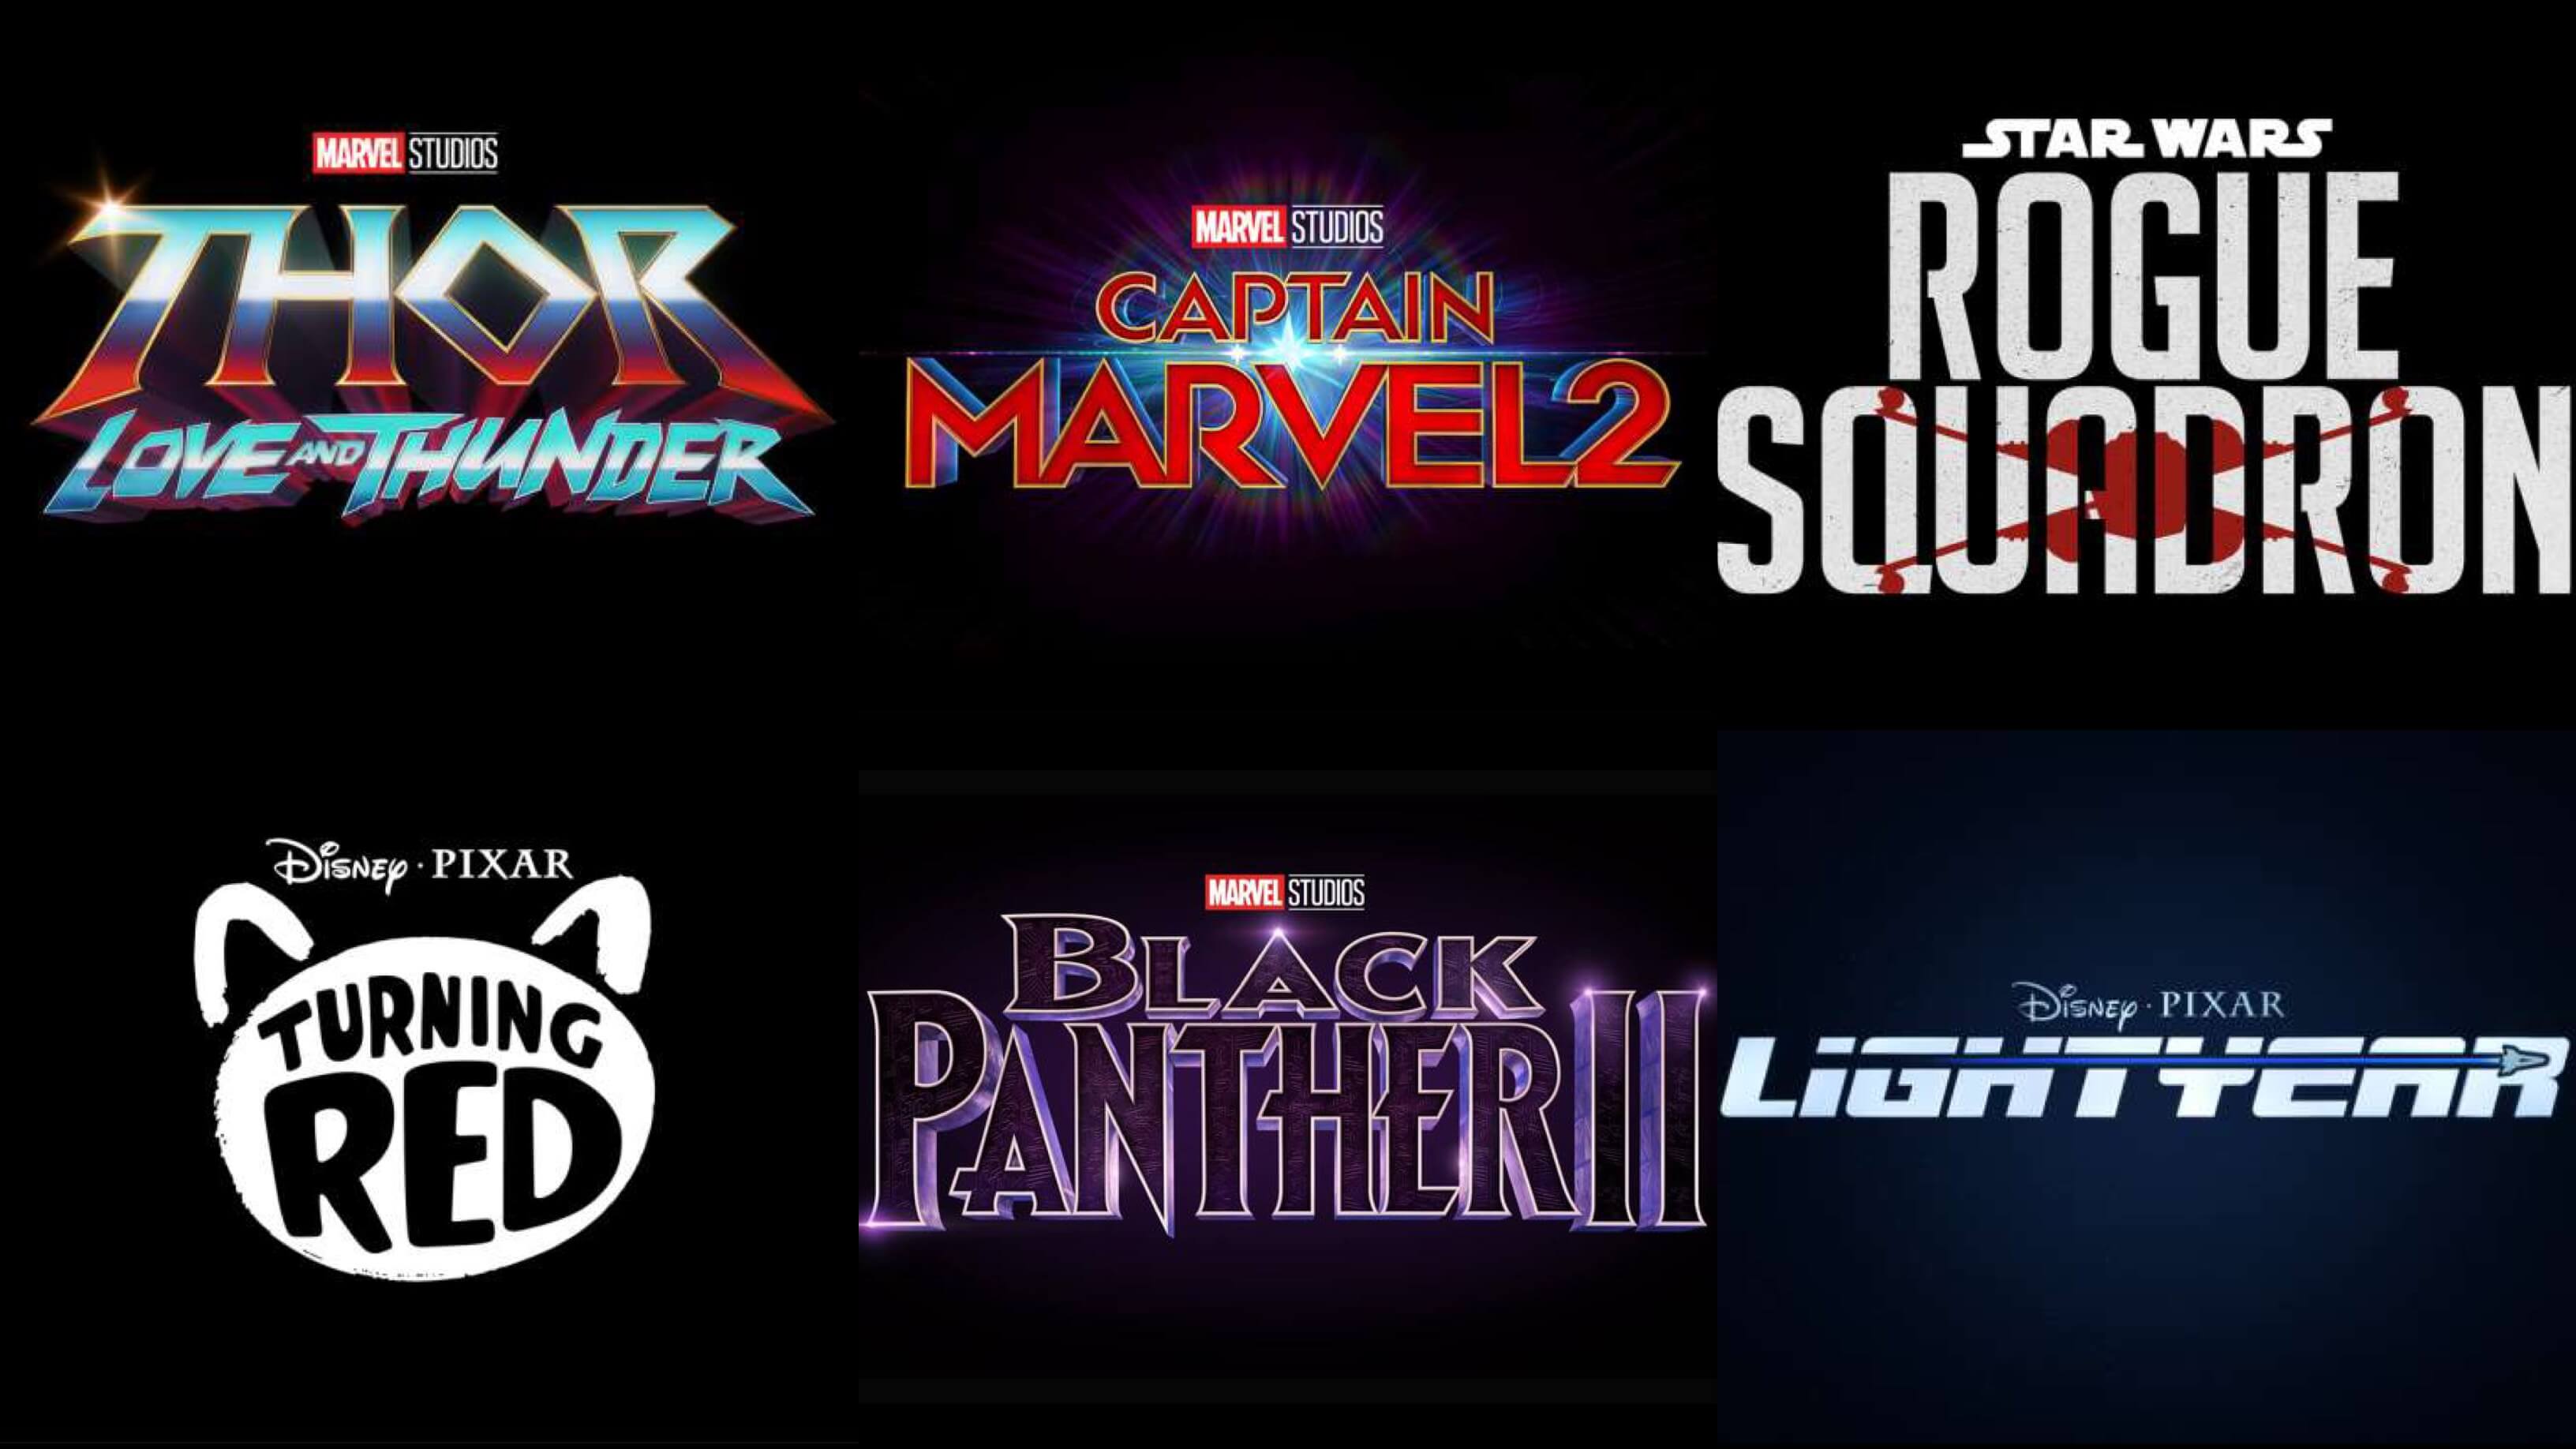 Disney Updates Theatrical Release Schedule After Yesterday’s Investor Day 2020